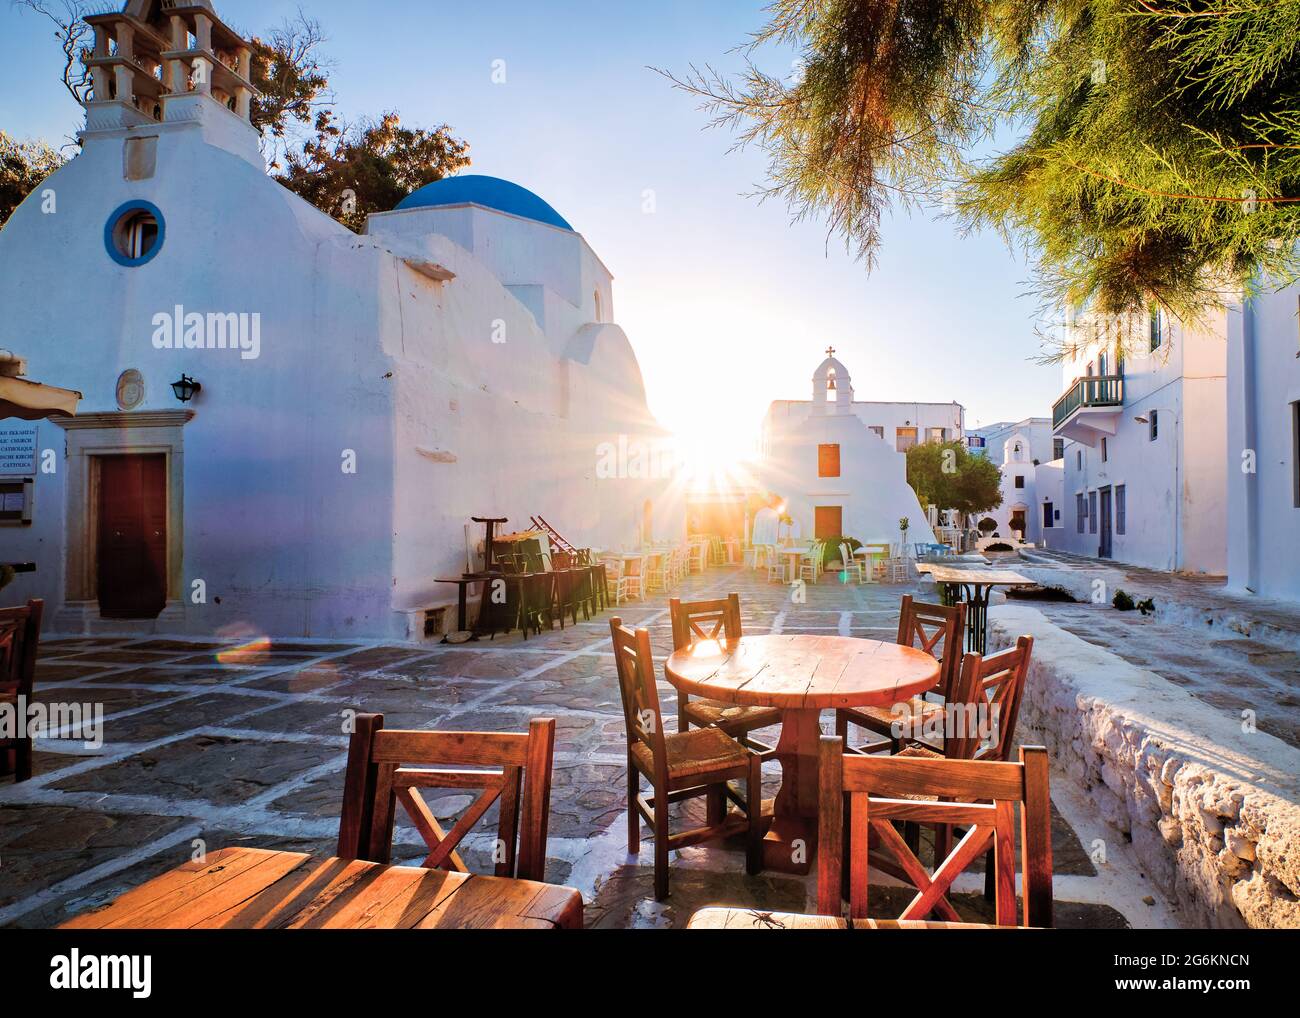 Sunrise in alleyways of Mykonos, Greece. Greek whitewashed churches in small town square, street cafe tables and chairs, sun and lens flares.  Stock Photo